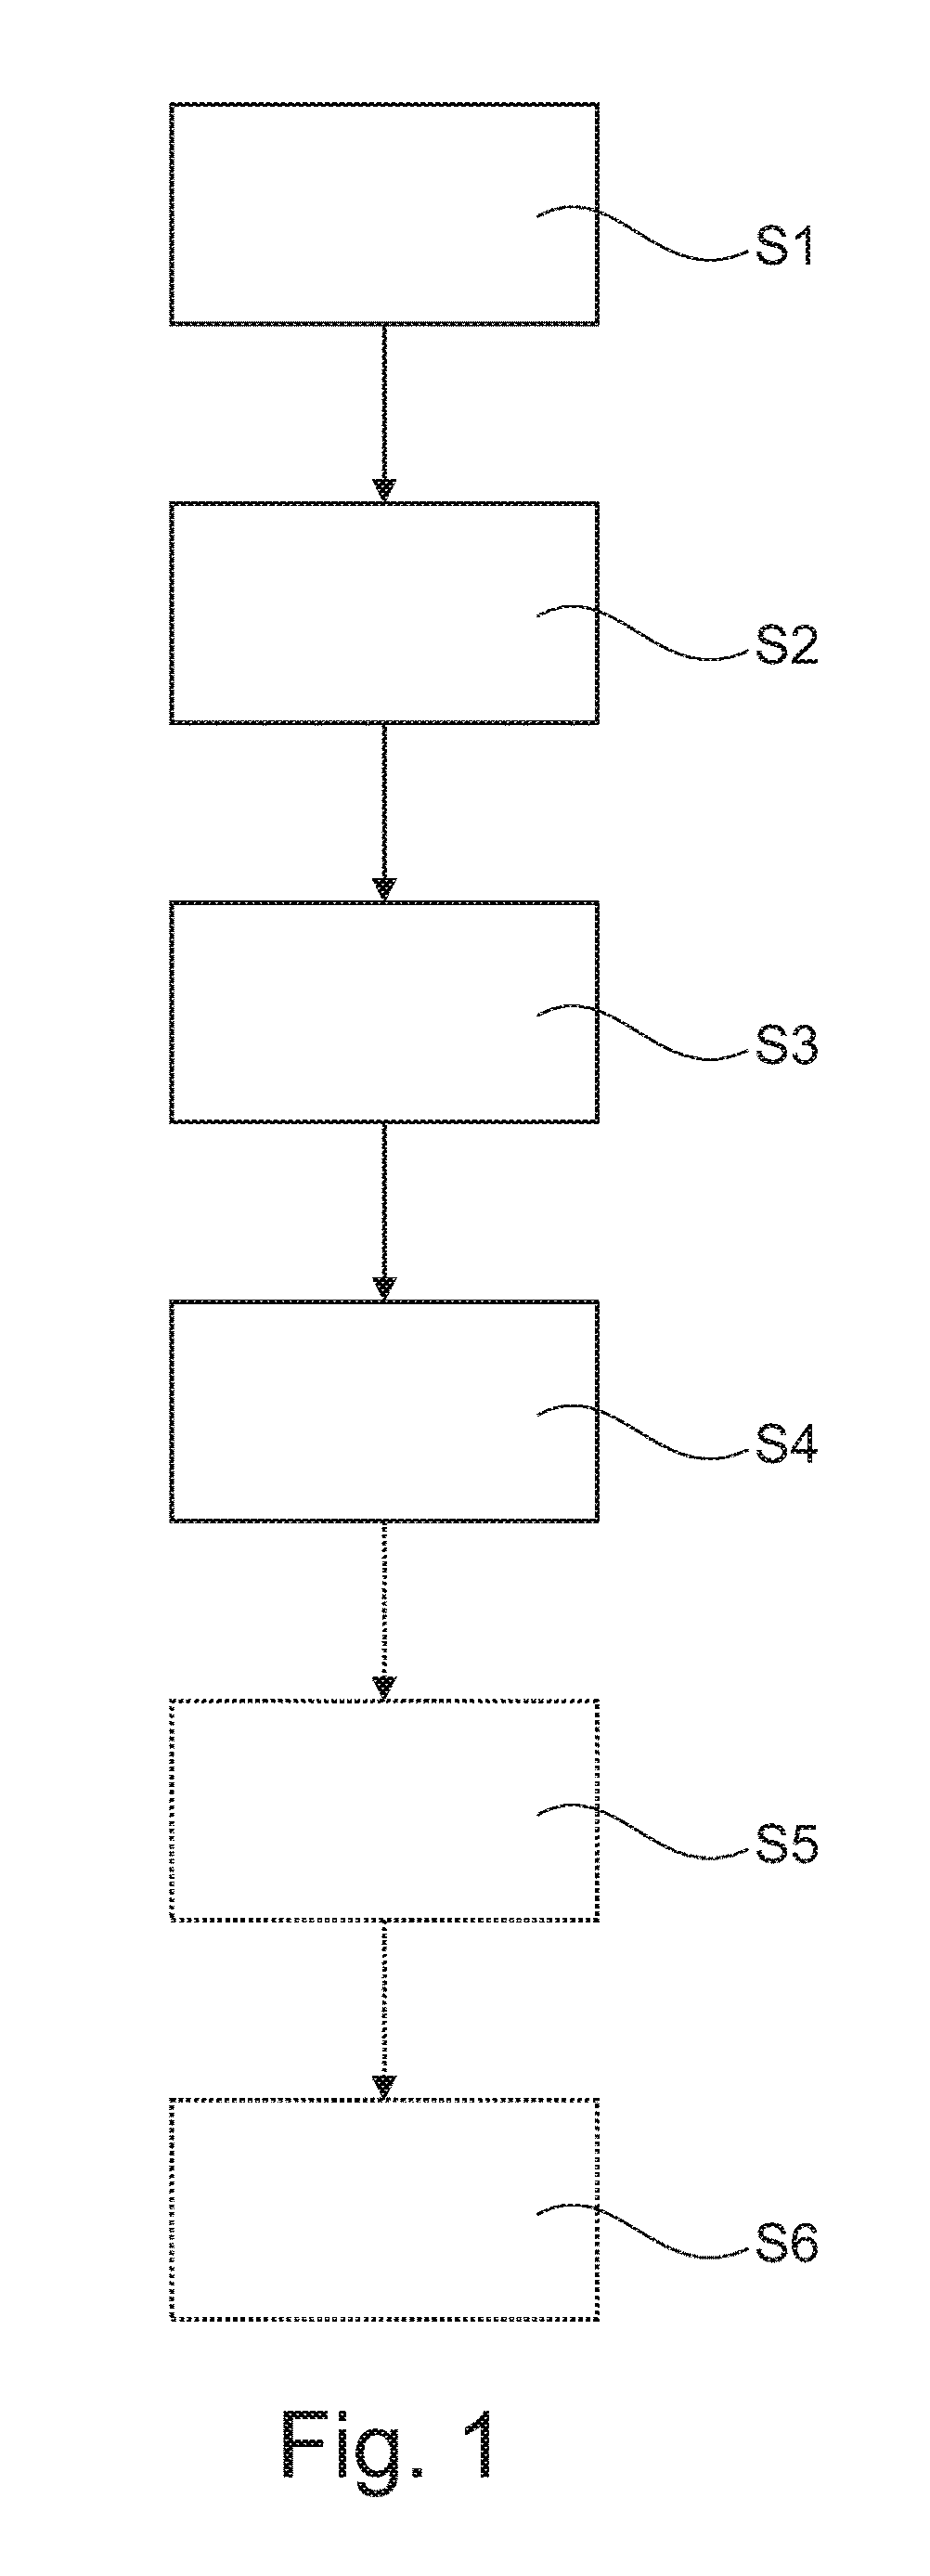 Method for operating a selective switching device for signals